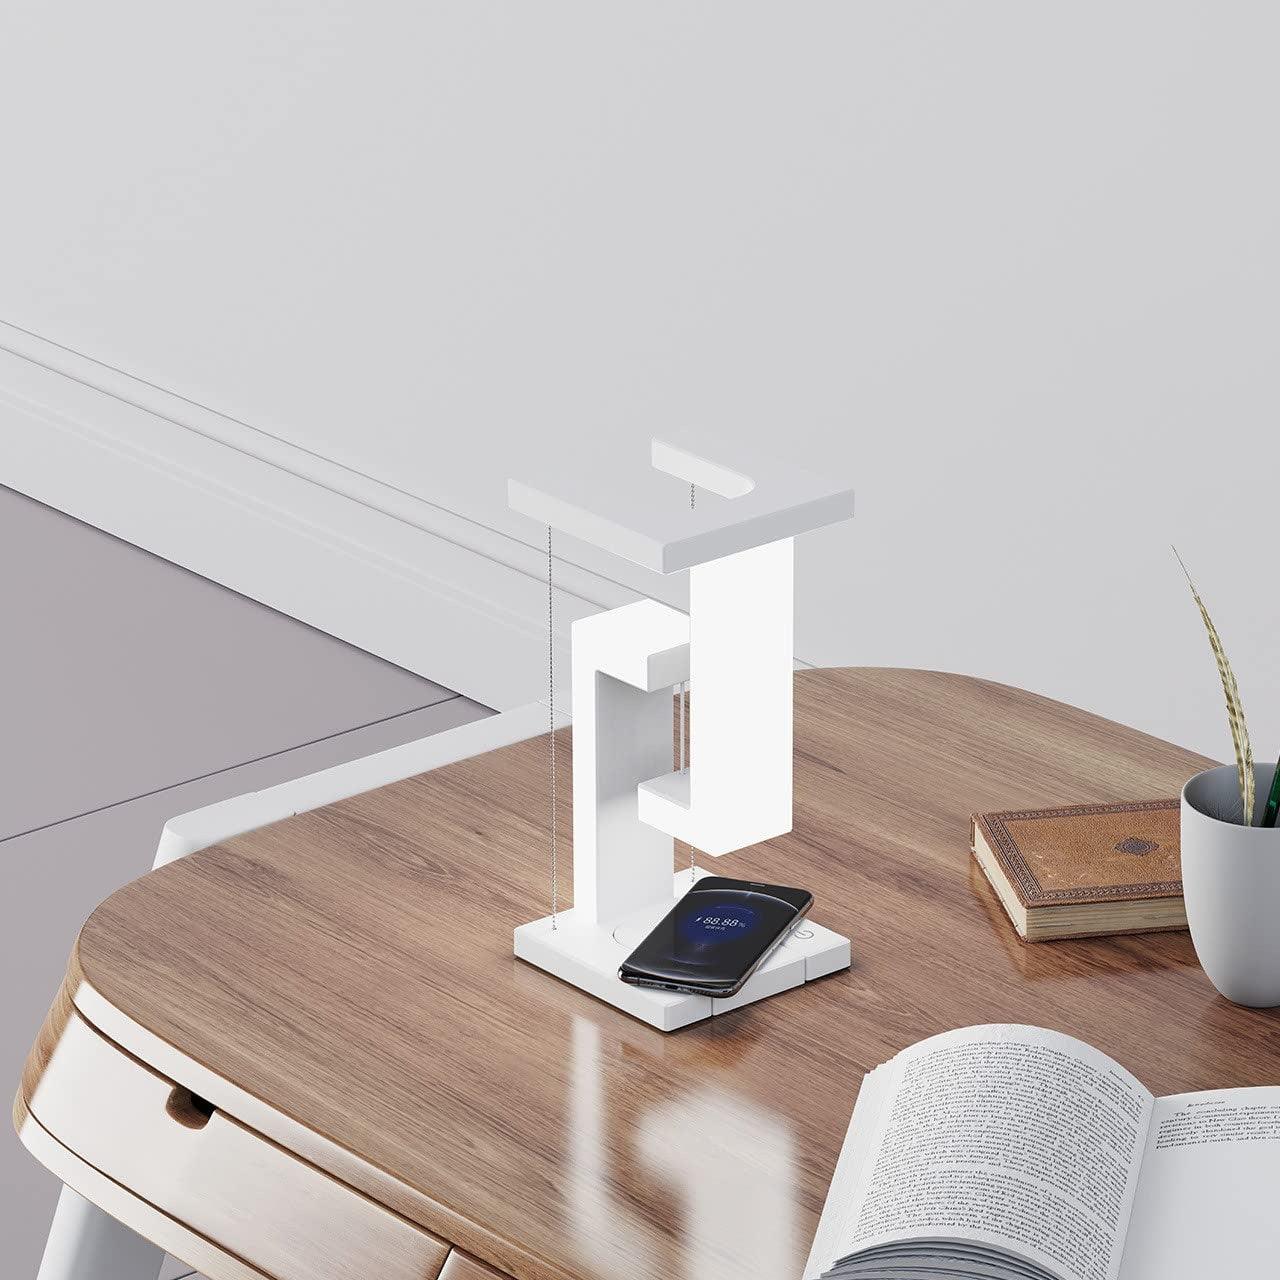 Creative Smartphone Wireless Charging Suspension Table Lamp Balance Lamp Floating For Home Bedroom-pamma store